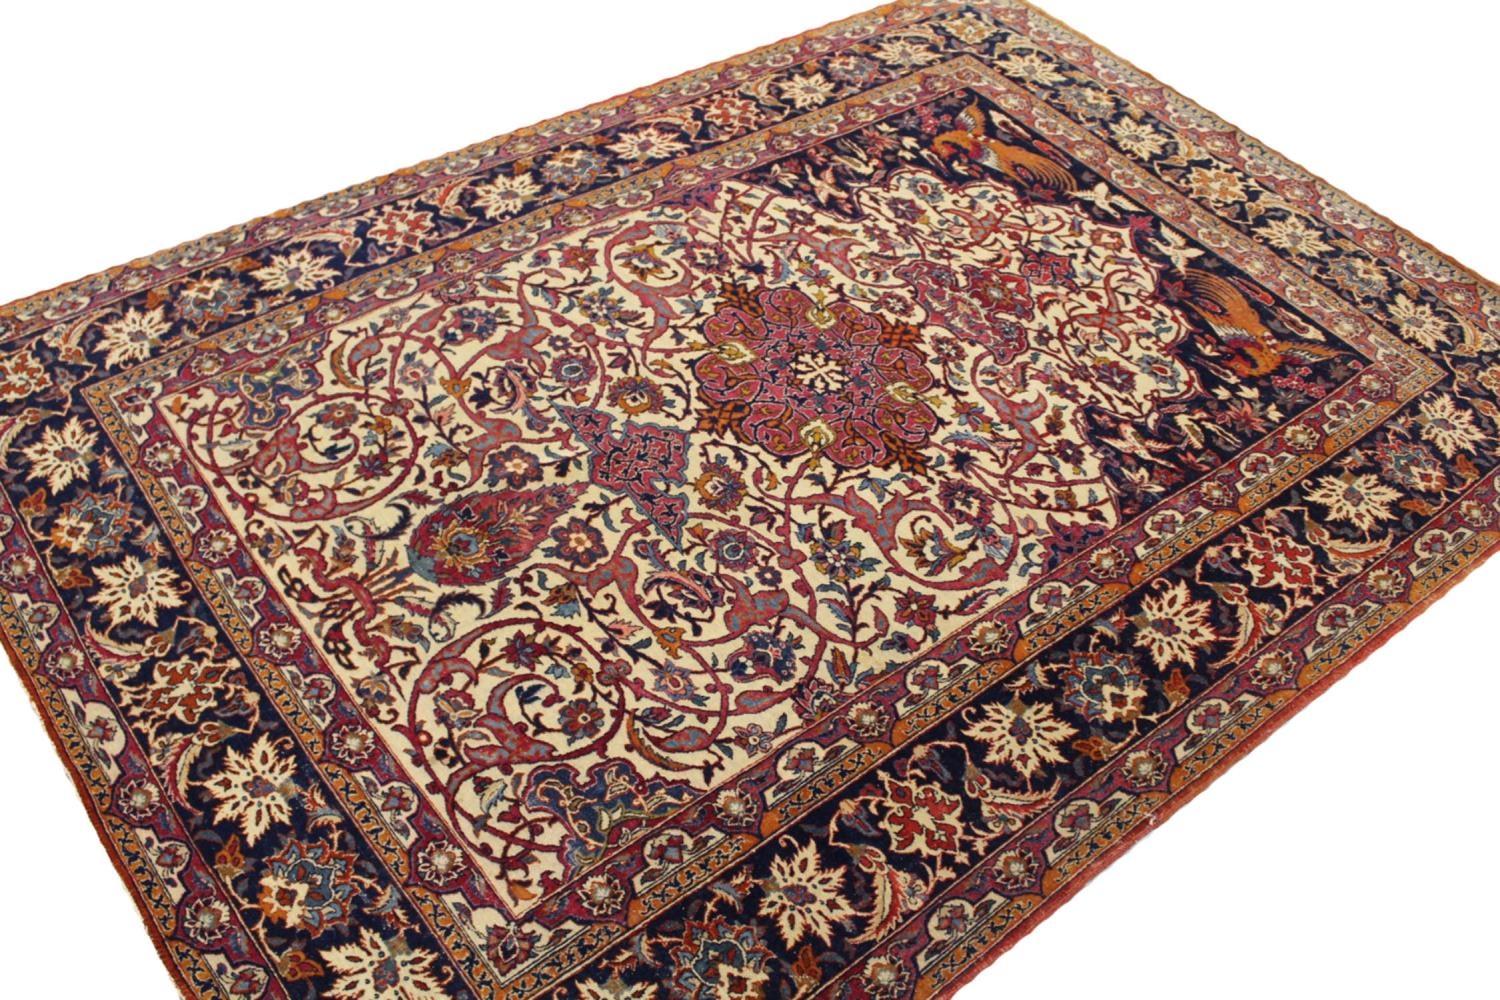 FINE ANTIQUE PERSIAN ISPHAHAN RUG, 209cm x 145cm. - Image 3 of 7